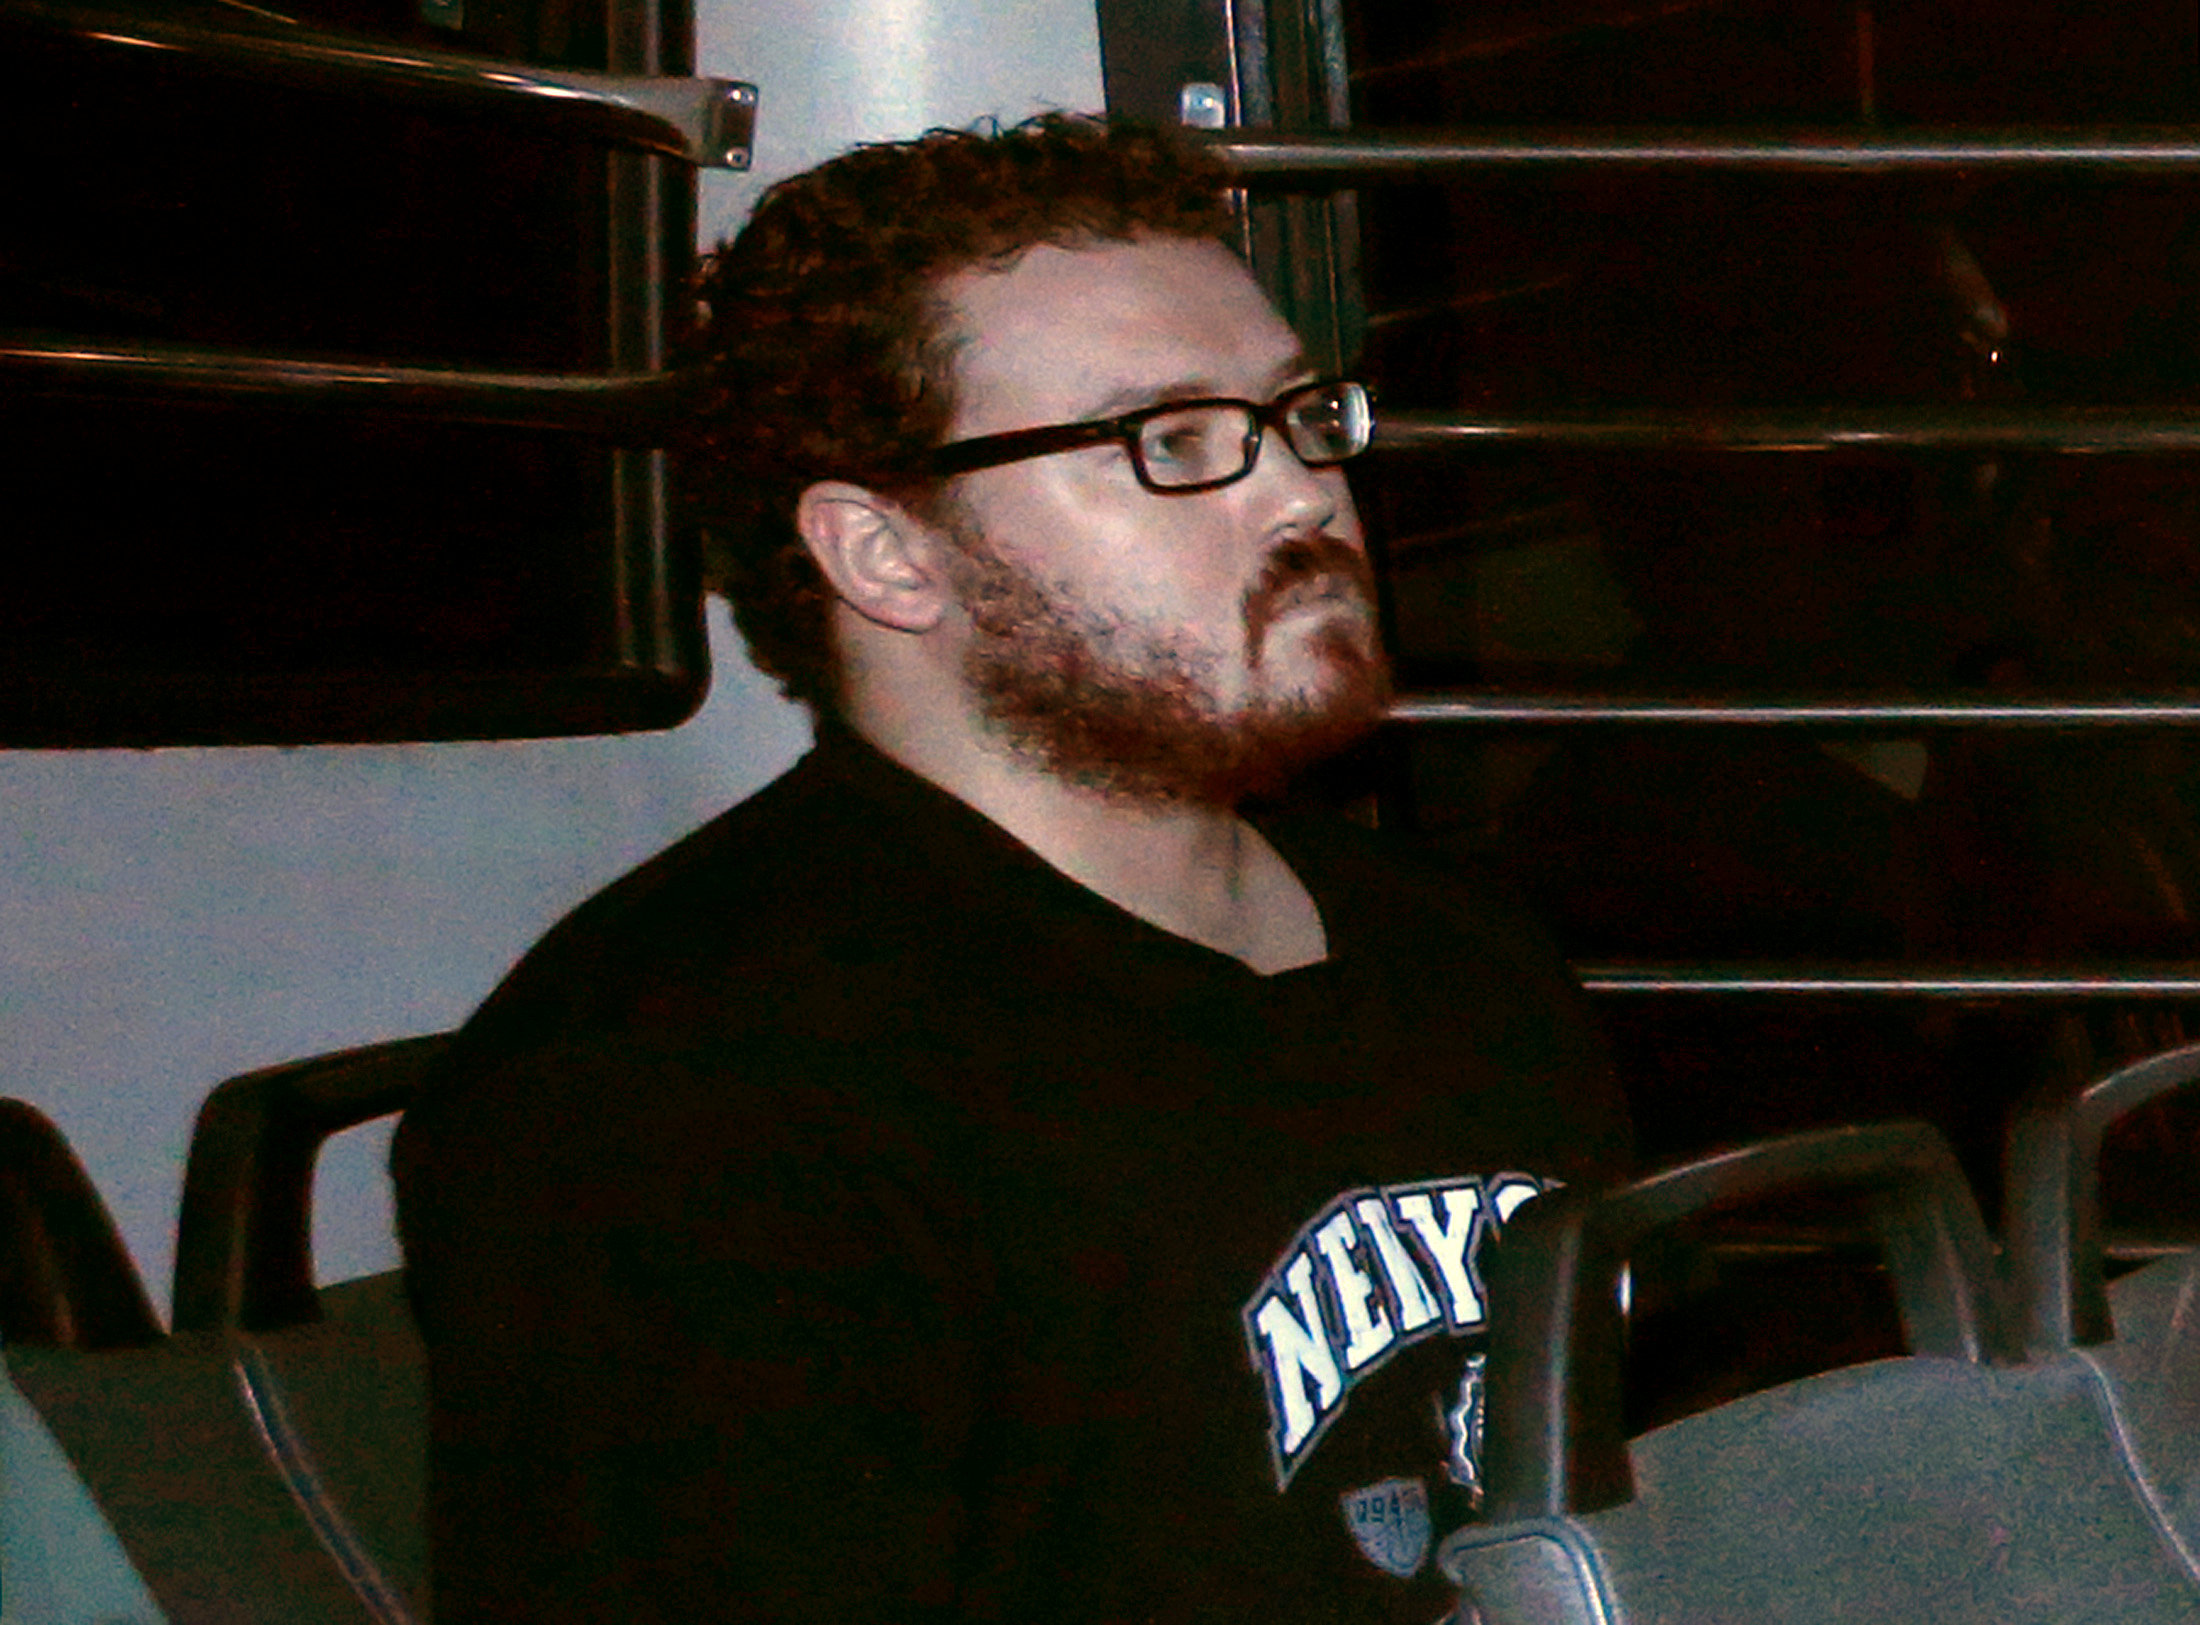 File photo of Rurik George Caton Jutting, a British banker charged with two counts of murder after police found the bodies of two women in his apartment, sitting in the back row of a prison bus as he arrives at the Eastern Law Courts in Hong Kong November